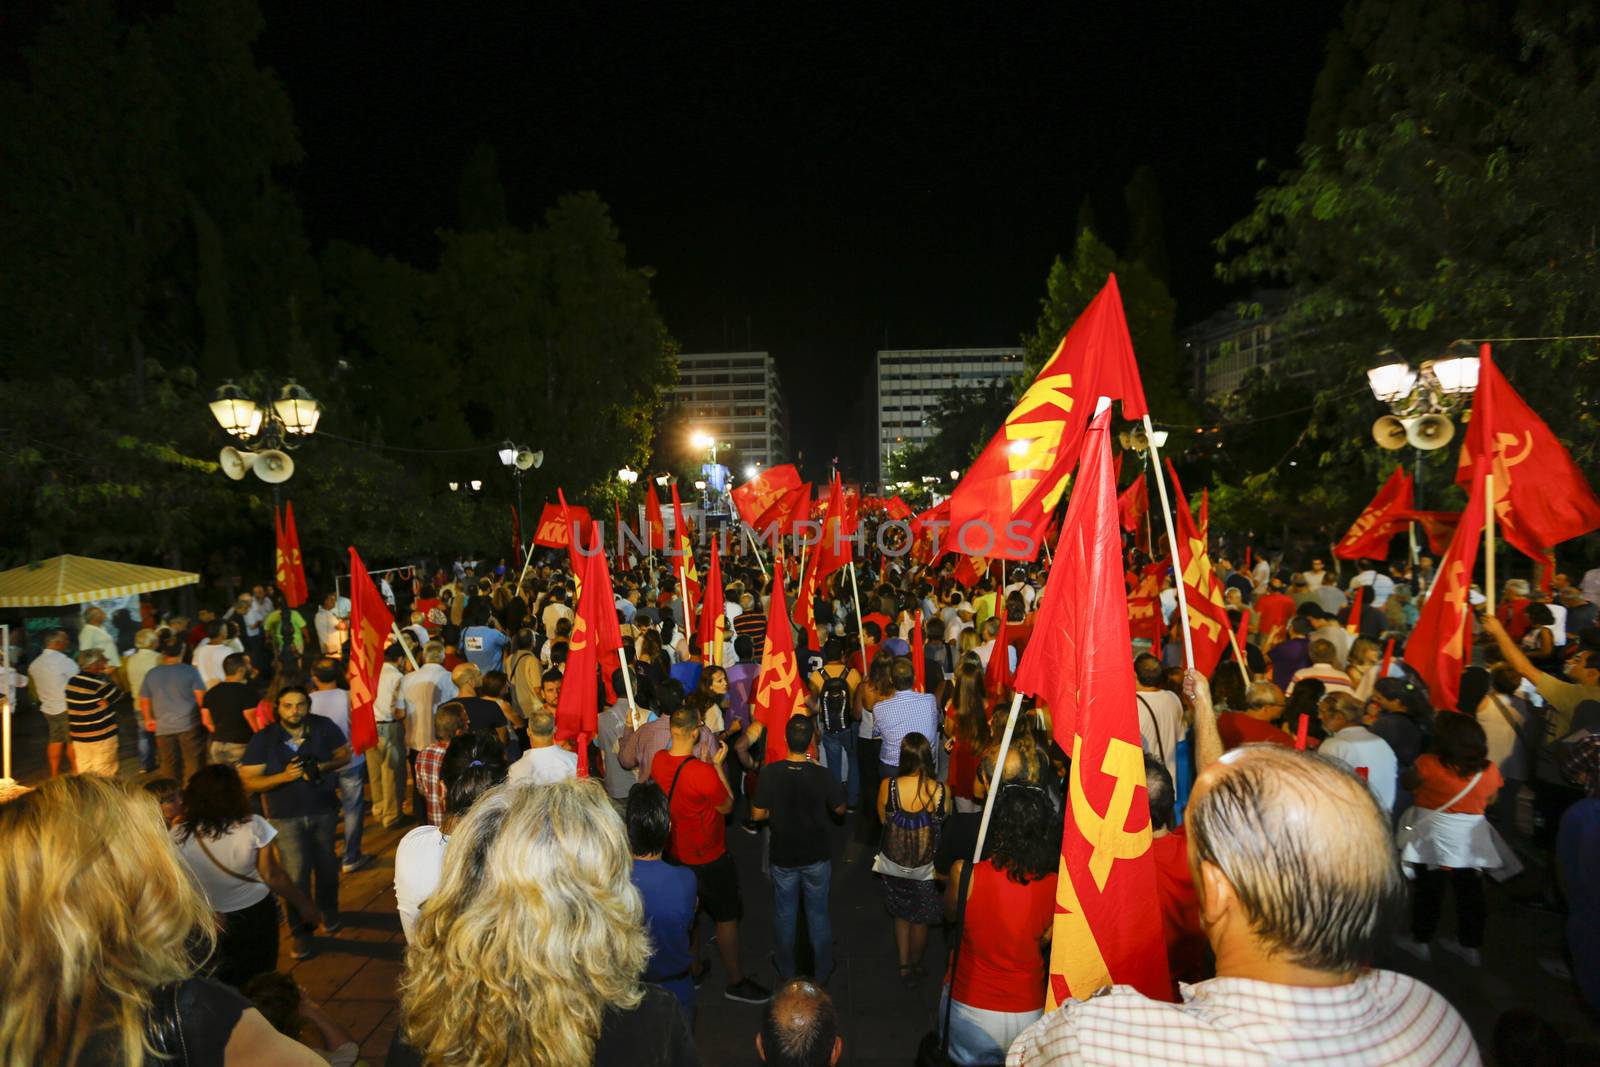 GREECE, Athens: The Communist Party of Greece (KKE) holds a massive campaign rally at Syntagma Square in Athens on September 16, 2015, ahead of the forthcoming snap elections on September 20. Thousands reportedly attended the rally, where KKE General Secretary Dimitris Koutsoumpas addressed supporters.